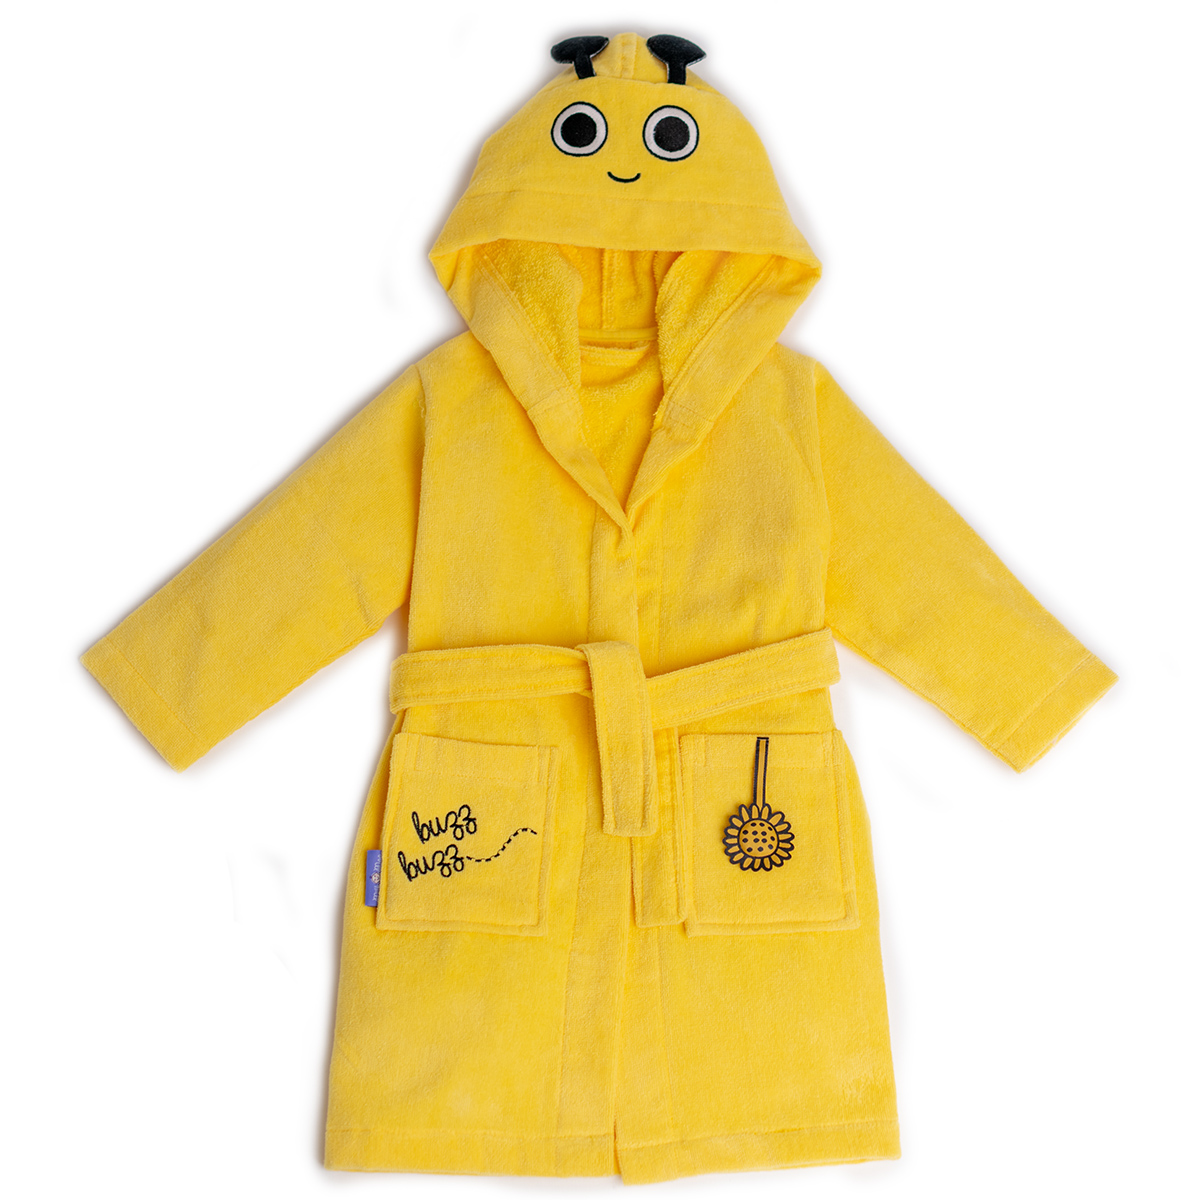 Milk&amp;Moo Buzzy Bee Toddler Robe, Kids Robe, 100% Cotton Kids Bathrobe, Ultra Soft and Absorbent Hooded Bathrobe for Girls and Boys, Yellow Color, Suitable for 2-4 Years